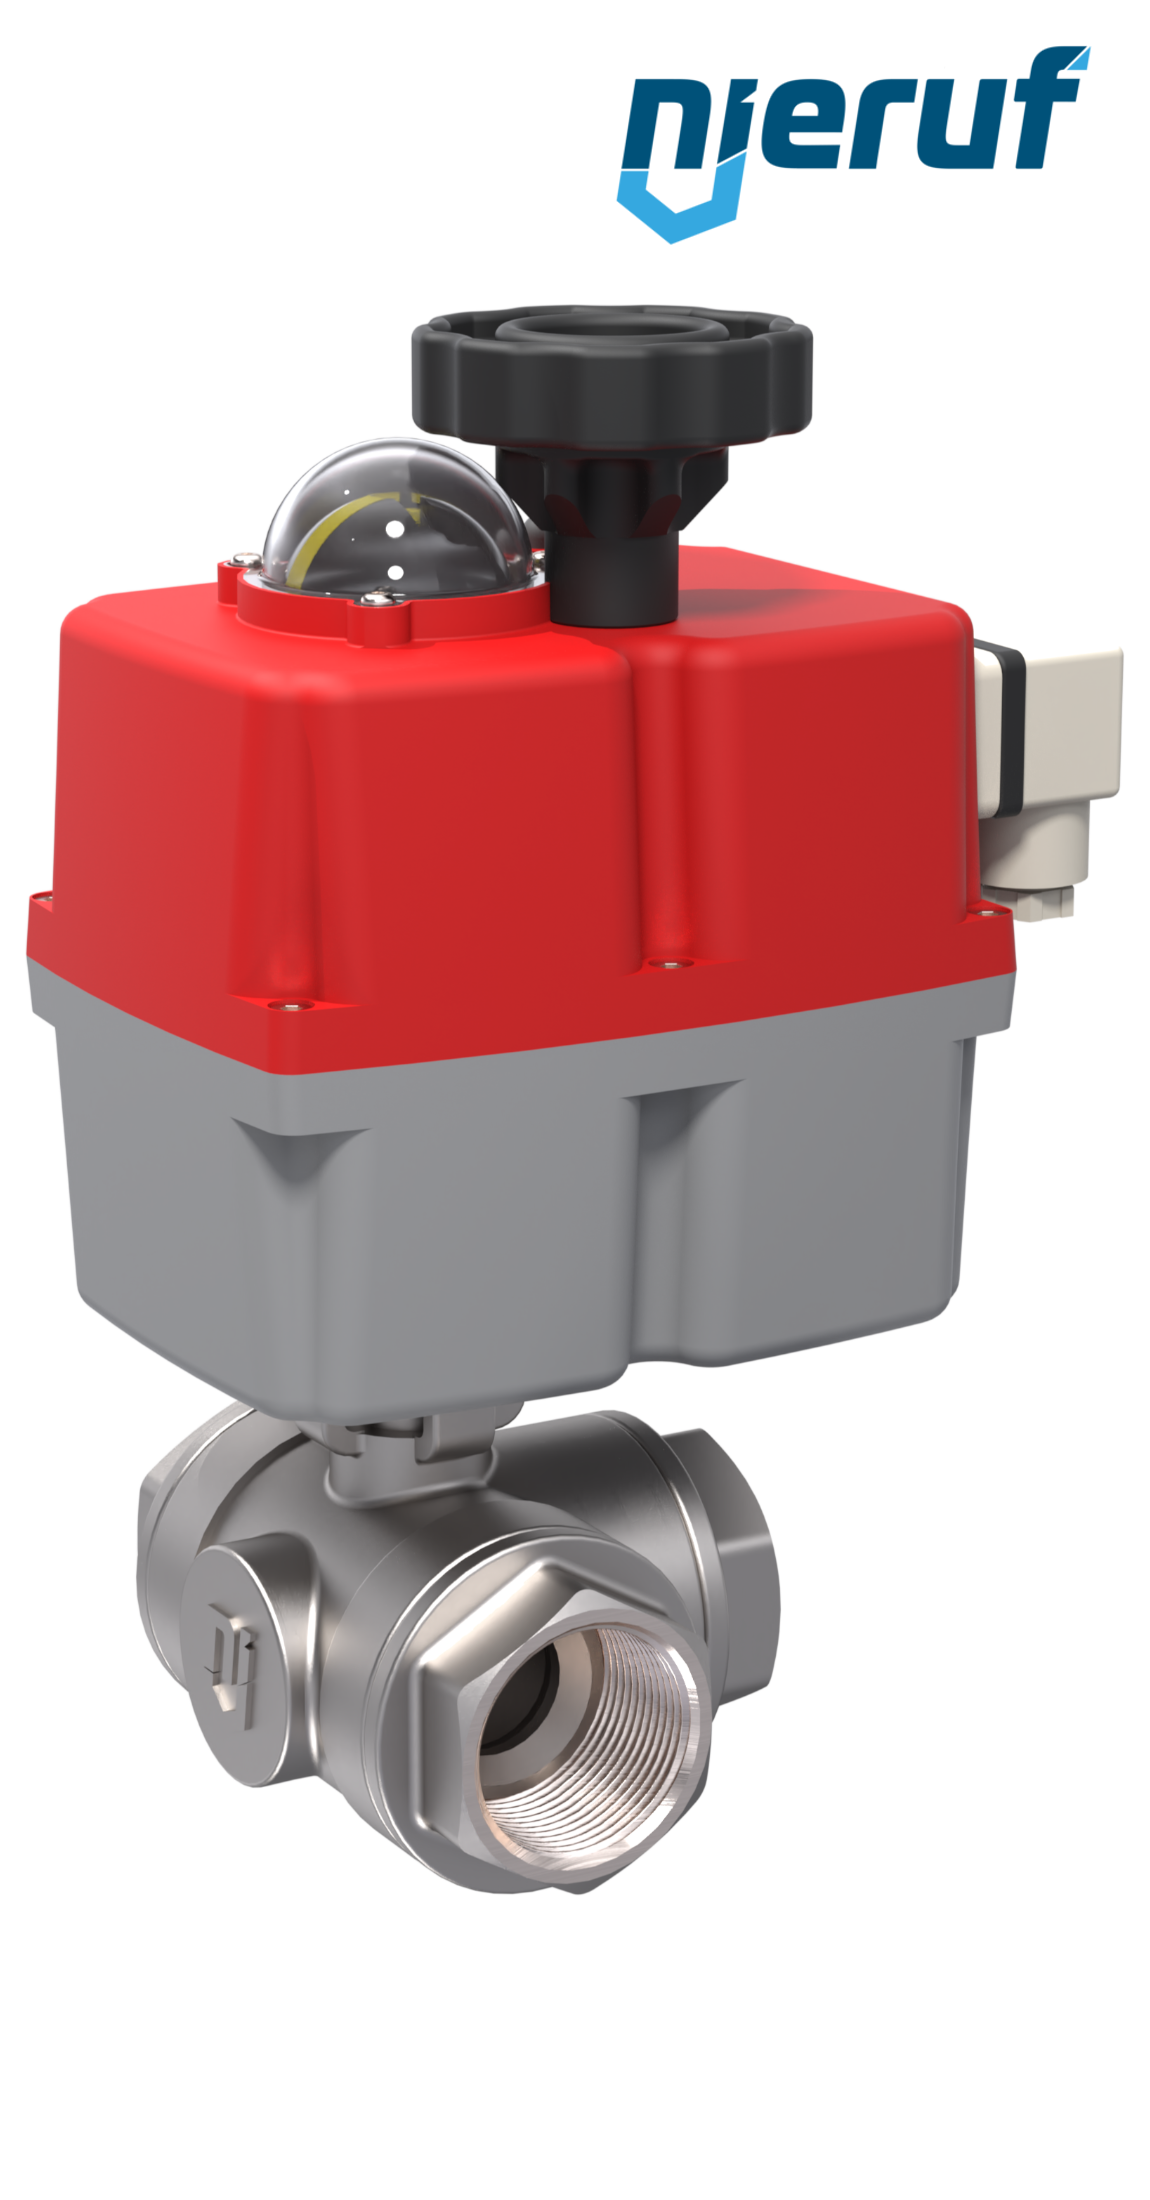 3 way automatic-ball valve 24-240V DN15 - 1/2" inch stainless steel reduced port design with T drilling